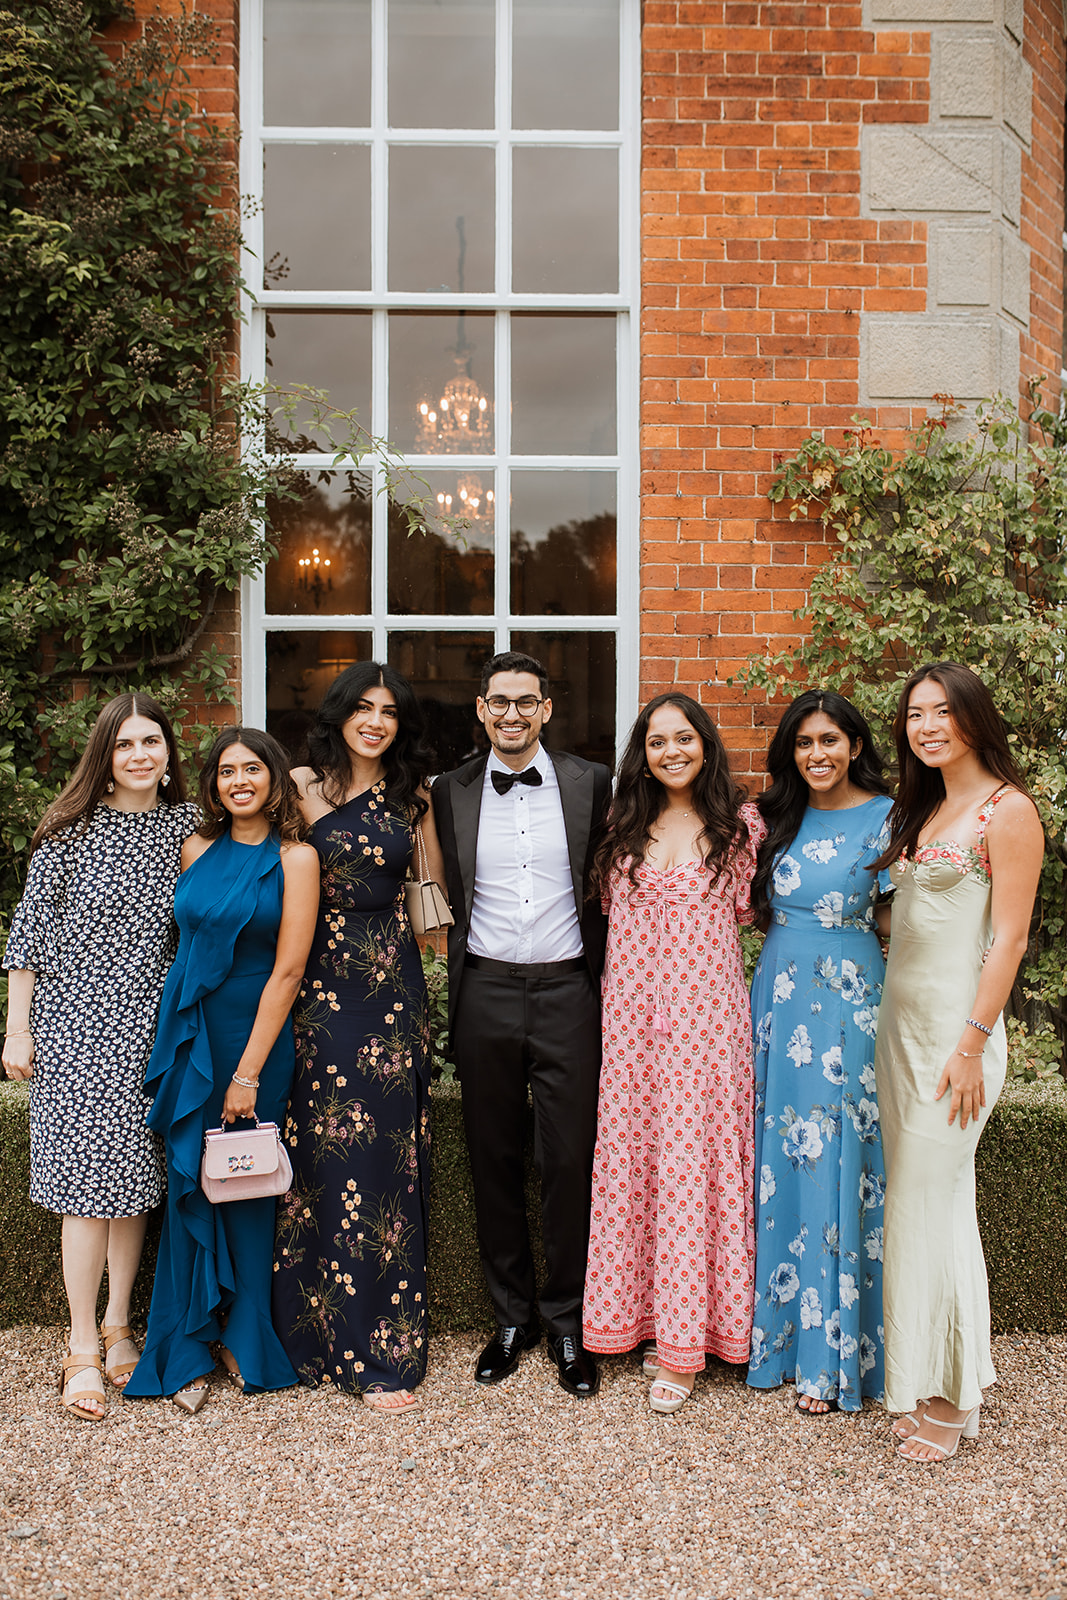 International Bridgerton inspired blended culture English country wedding at luxury venue Iscoyd Park